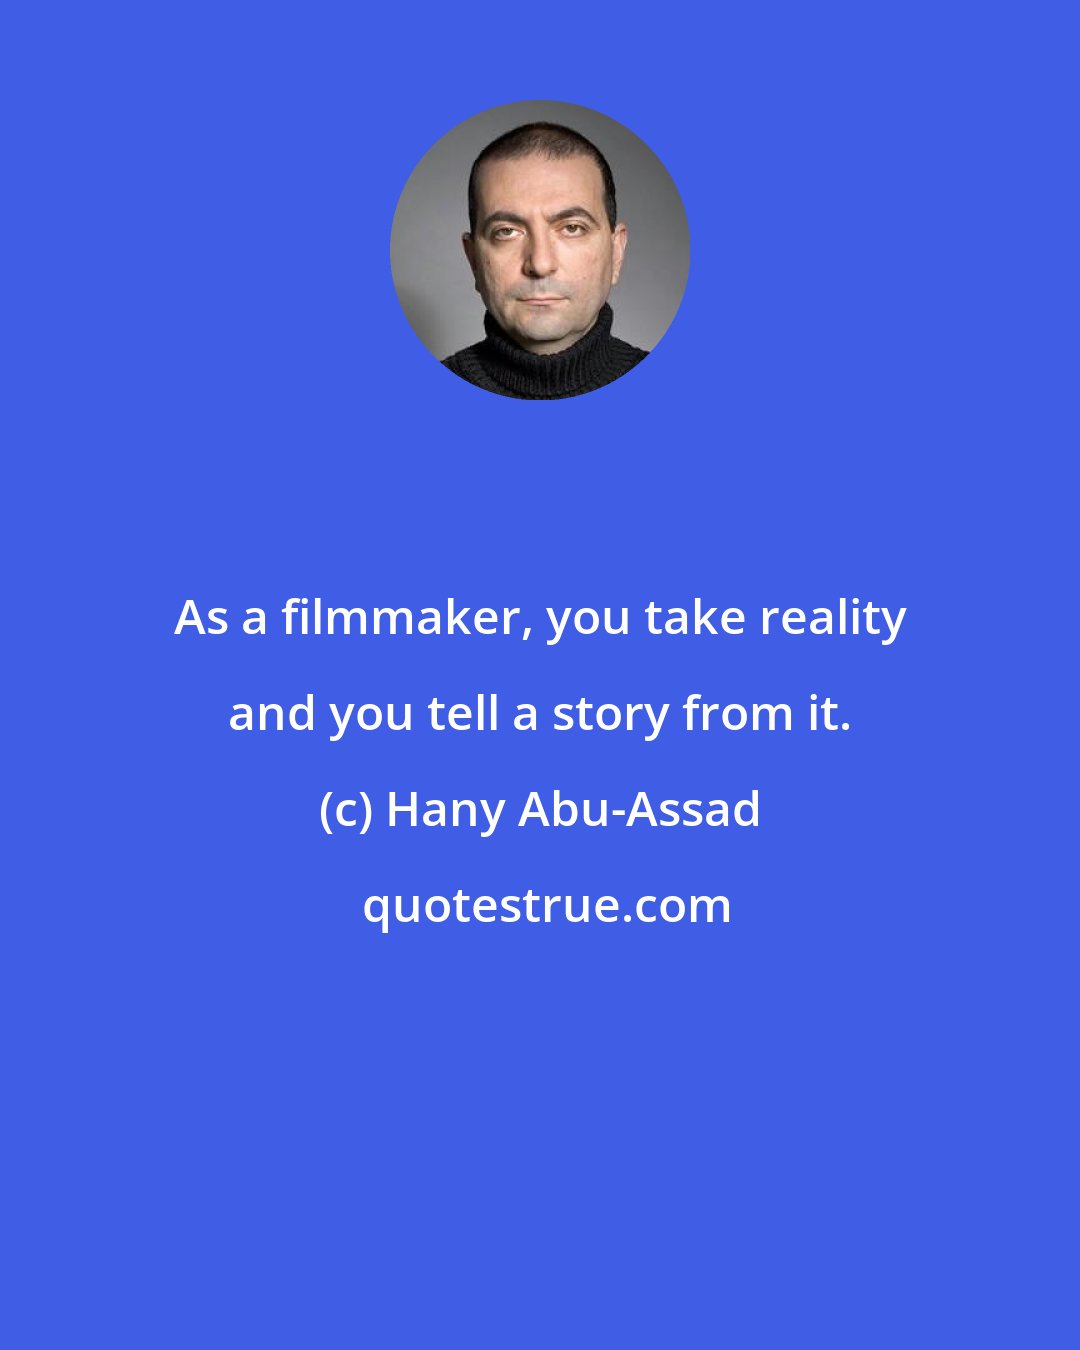 Hany Abu-Assad: As a filmmaker, you take reality and you tell a story from it.